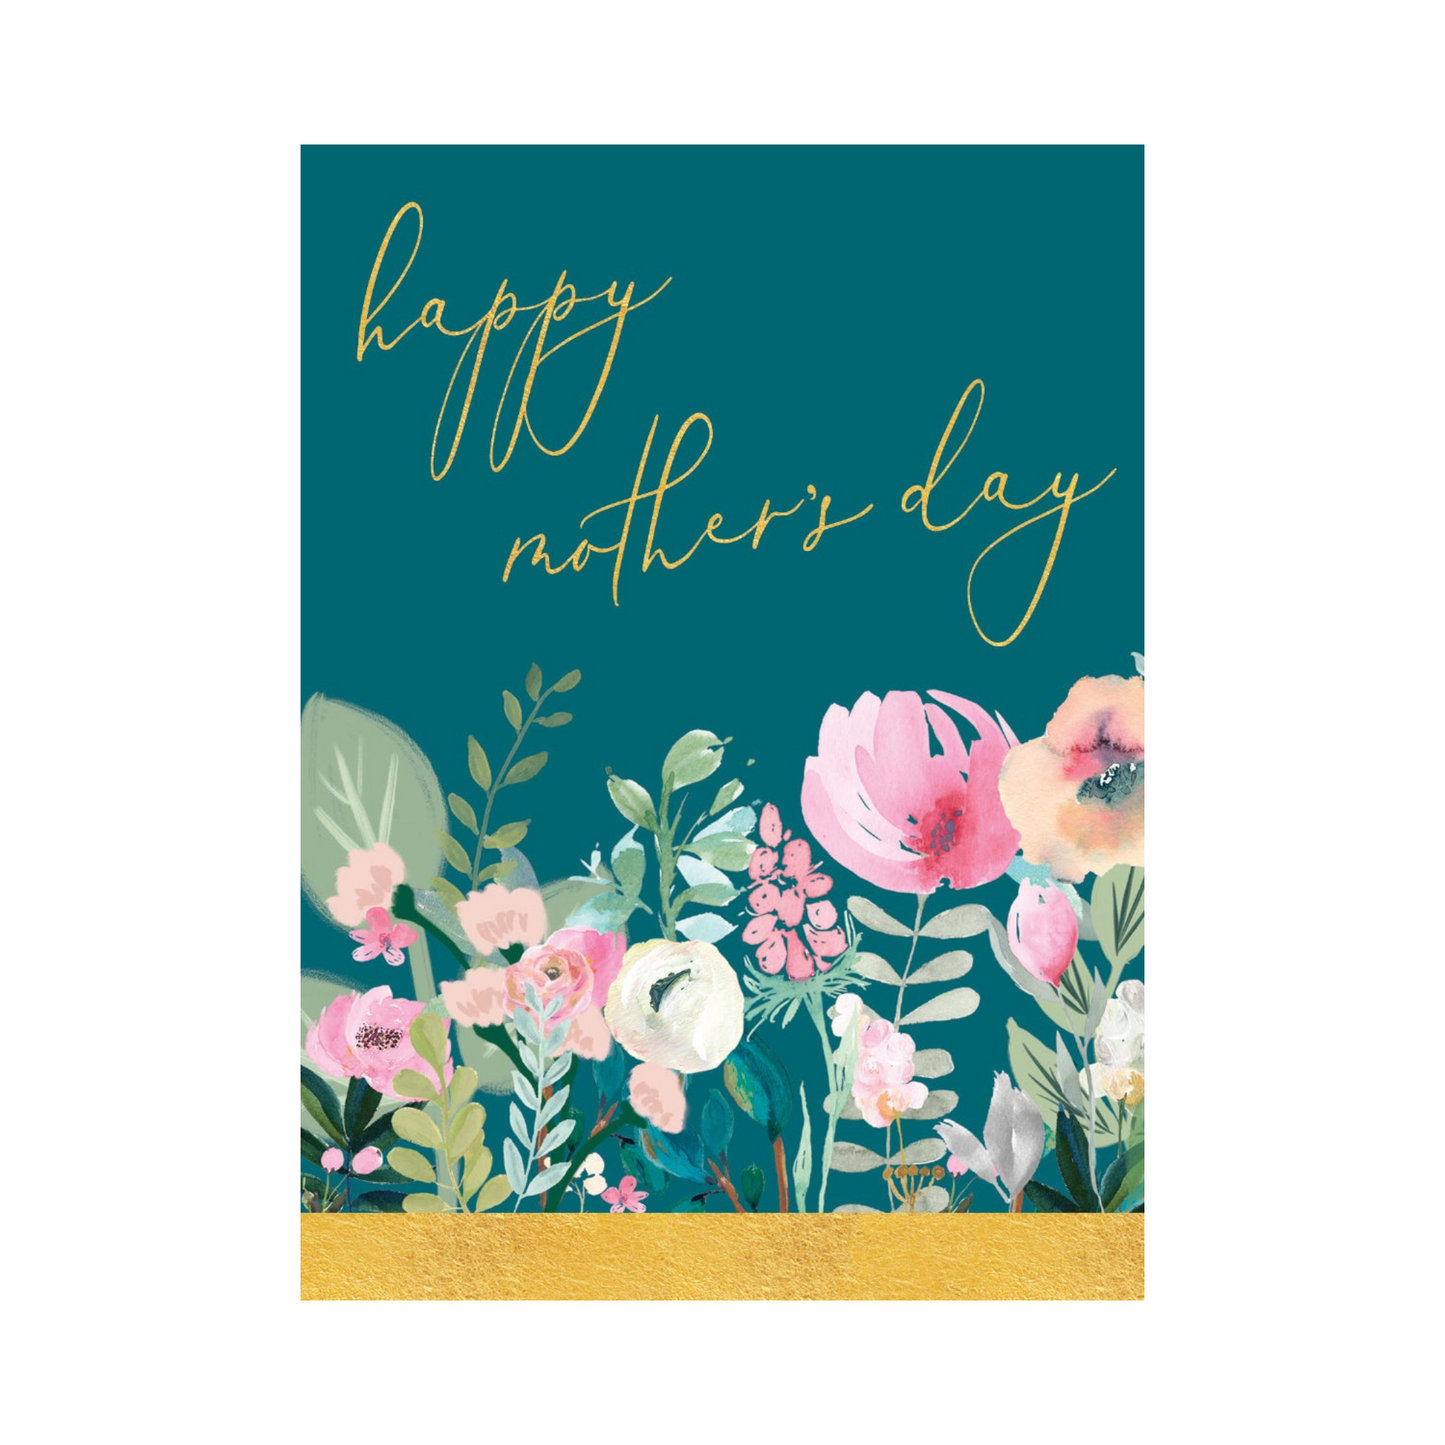 HAPPY MOTHER'S DAY GREETING CARD